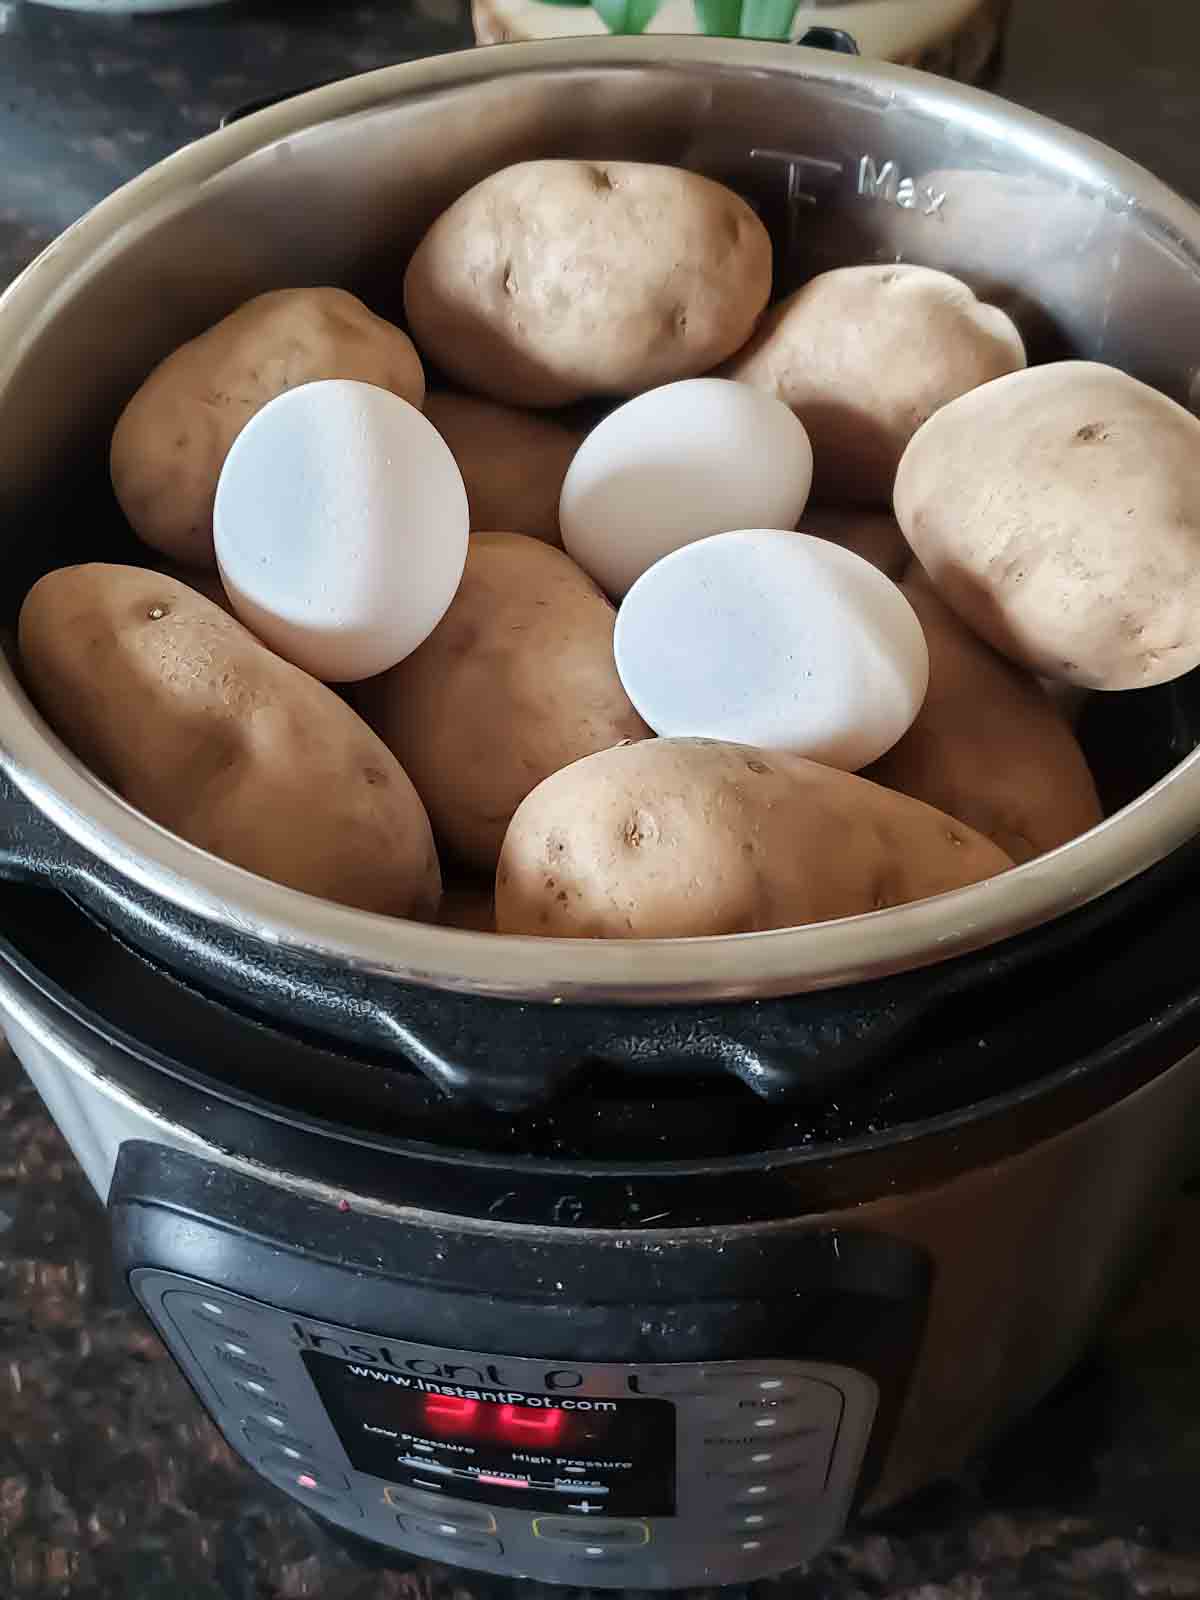 How to cook potatoes and eggs in Instant Pot to make creamy potato salad.